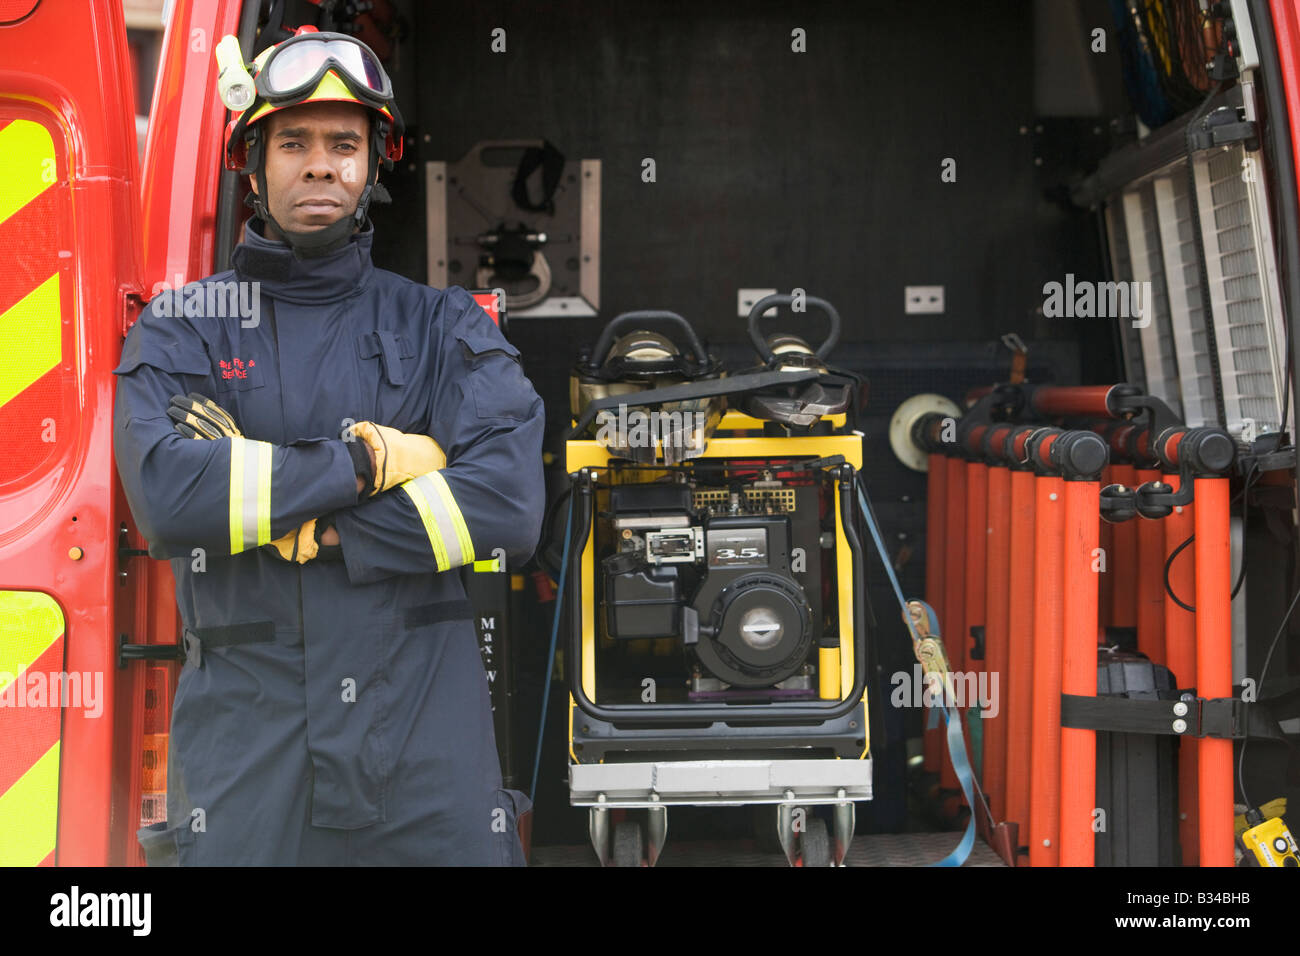 Rescue worker standing by open back door of rescue vehicle Stock Photo